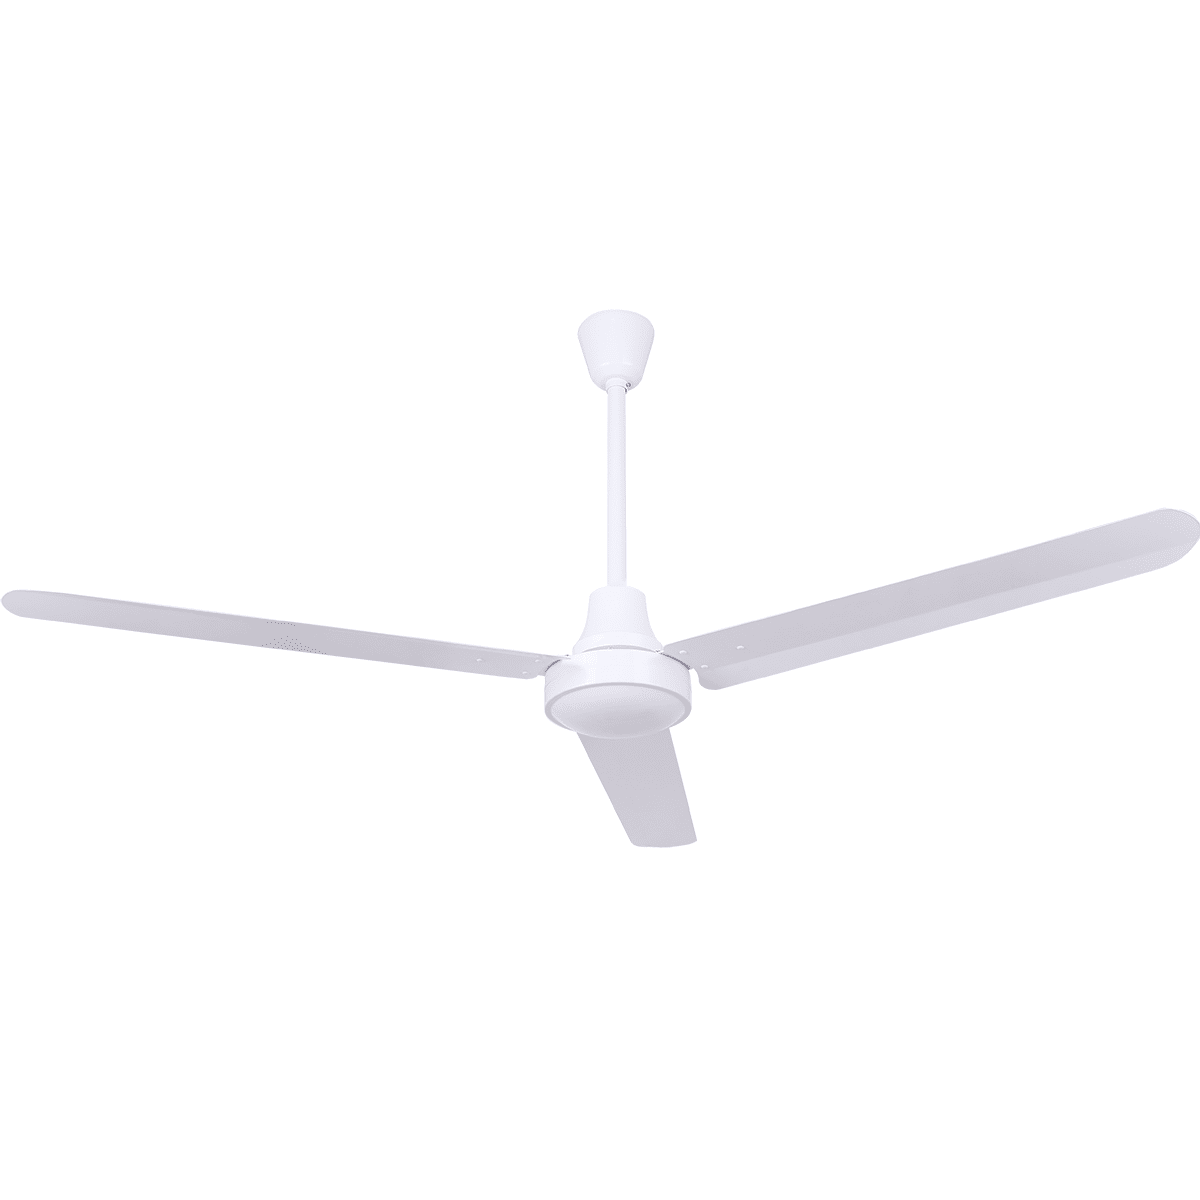 Canarm High Performance DC Industrial Fan - 48-in. White